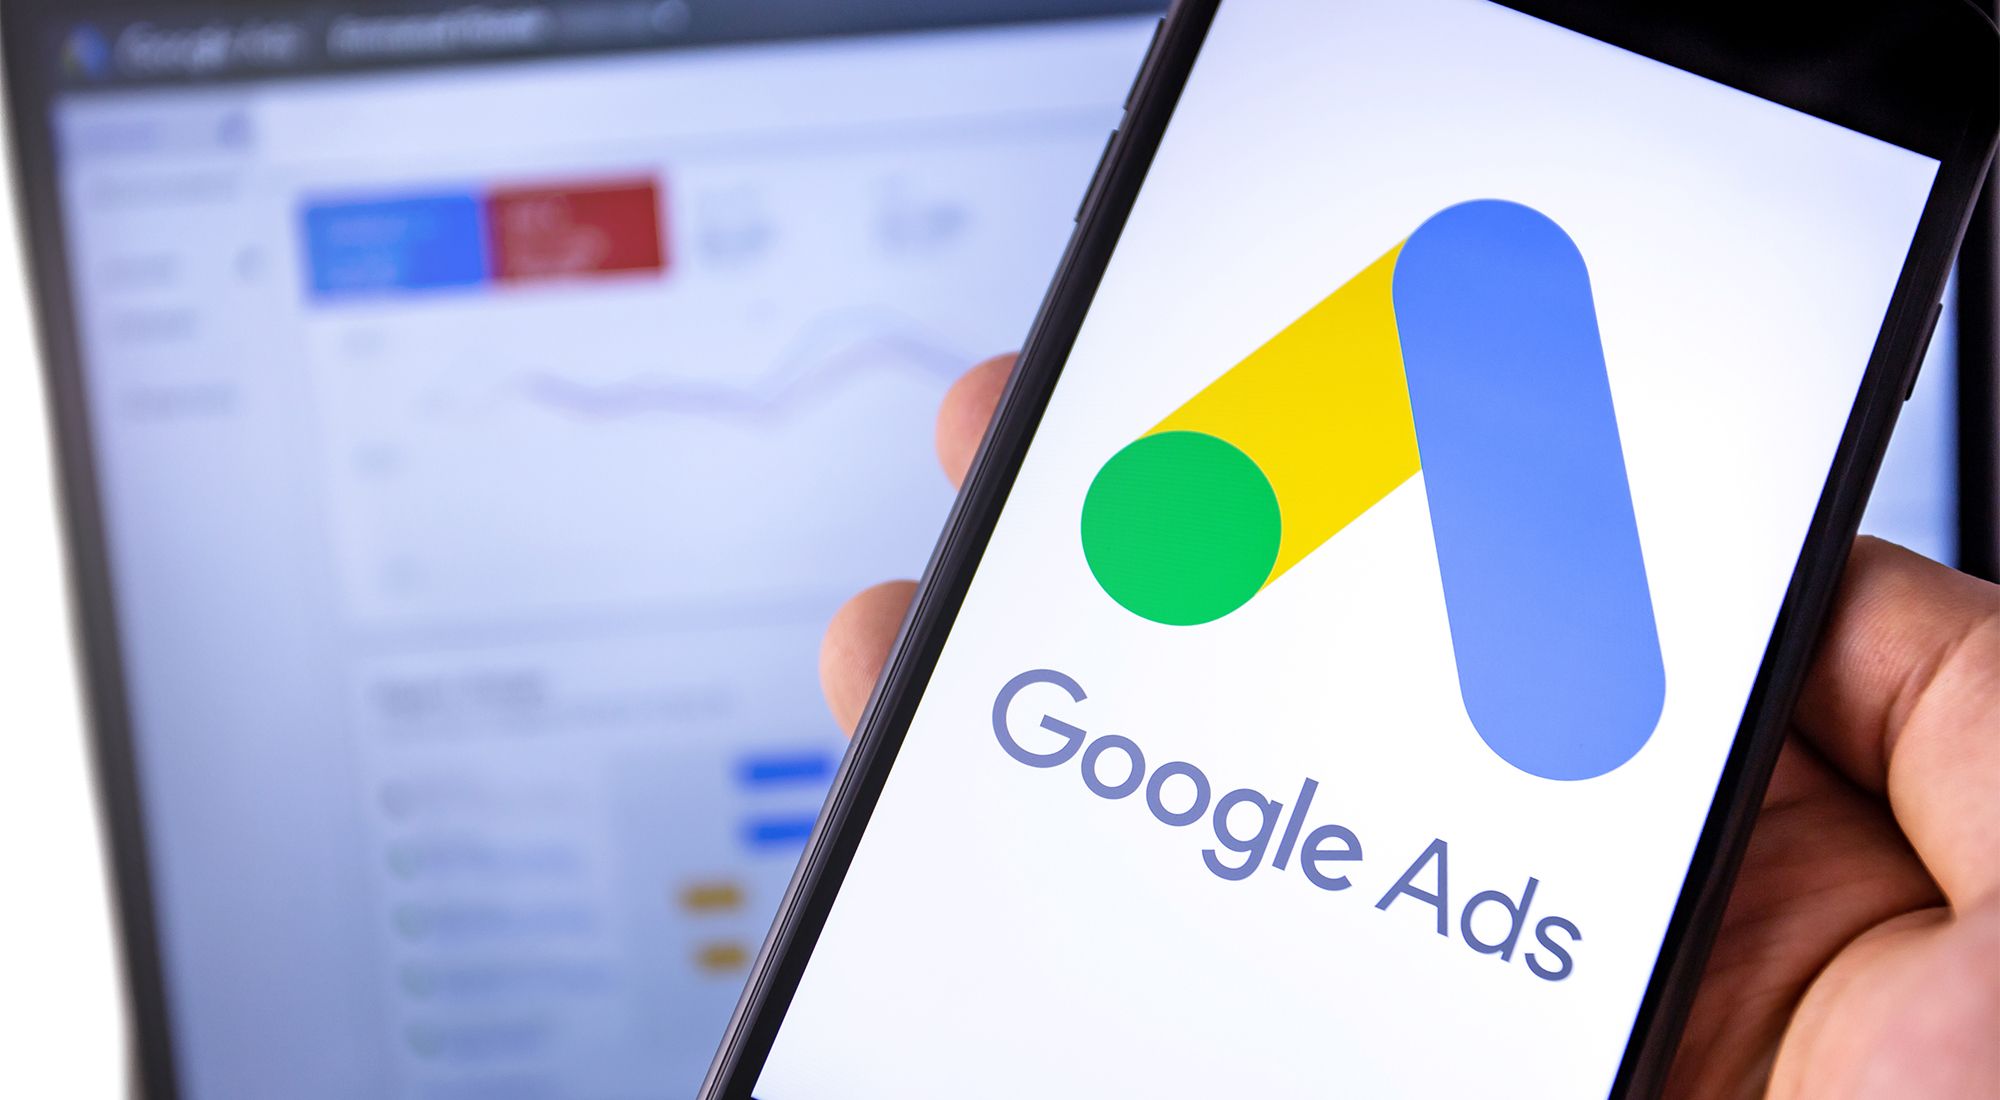 How To Improve Your Google Ads Quality Score Quickly?